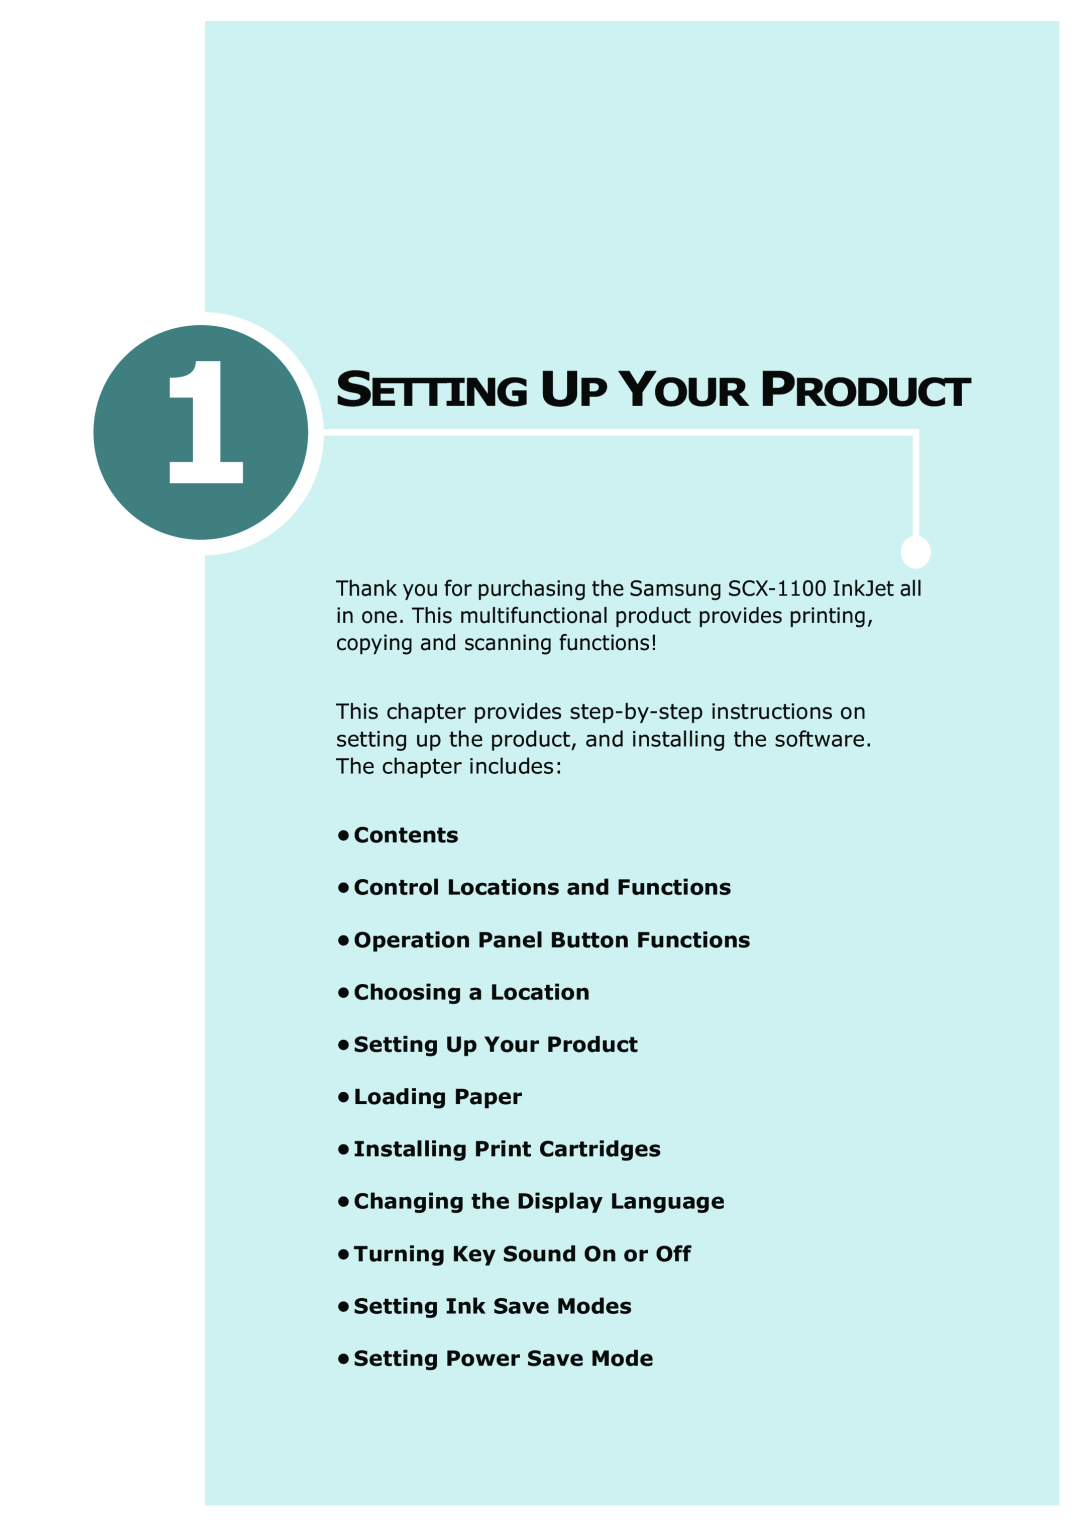 Samsung SCX-1100 manual Setting Up Your Product, Contents Control Locations and Functions 